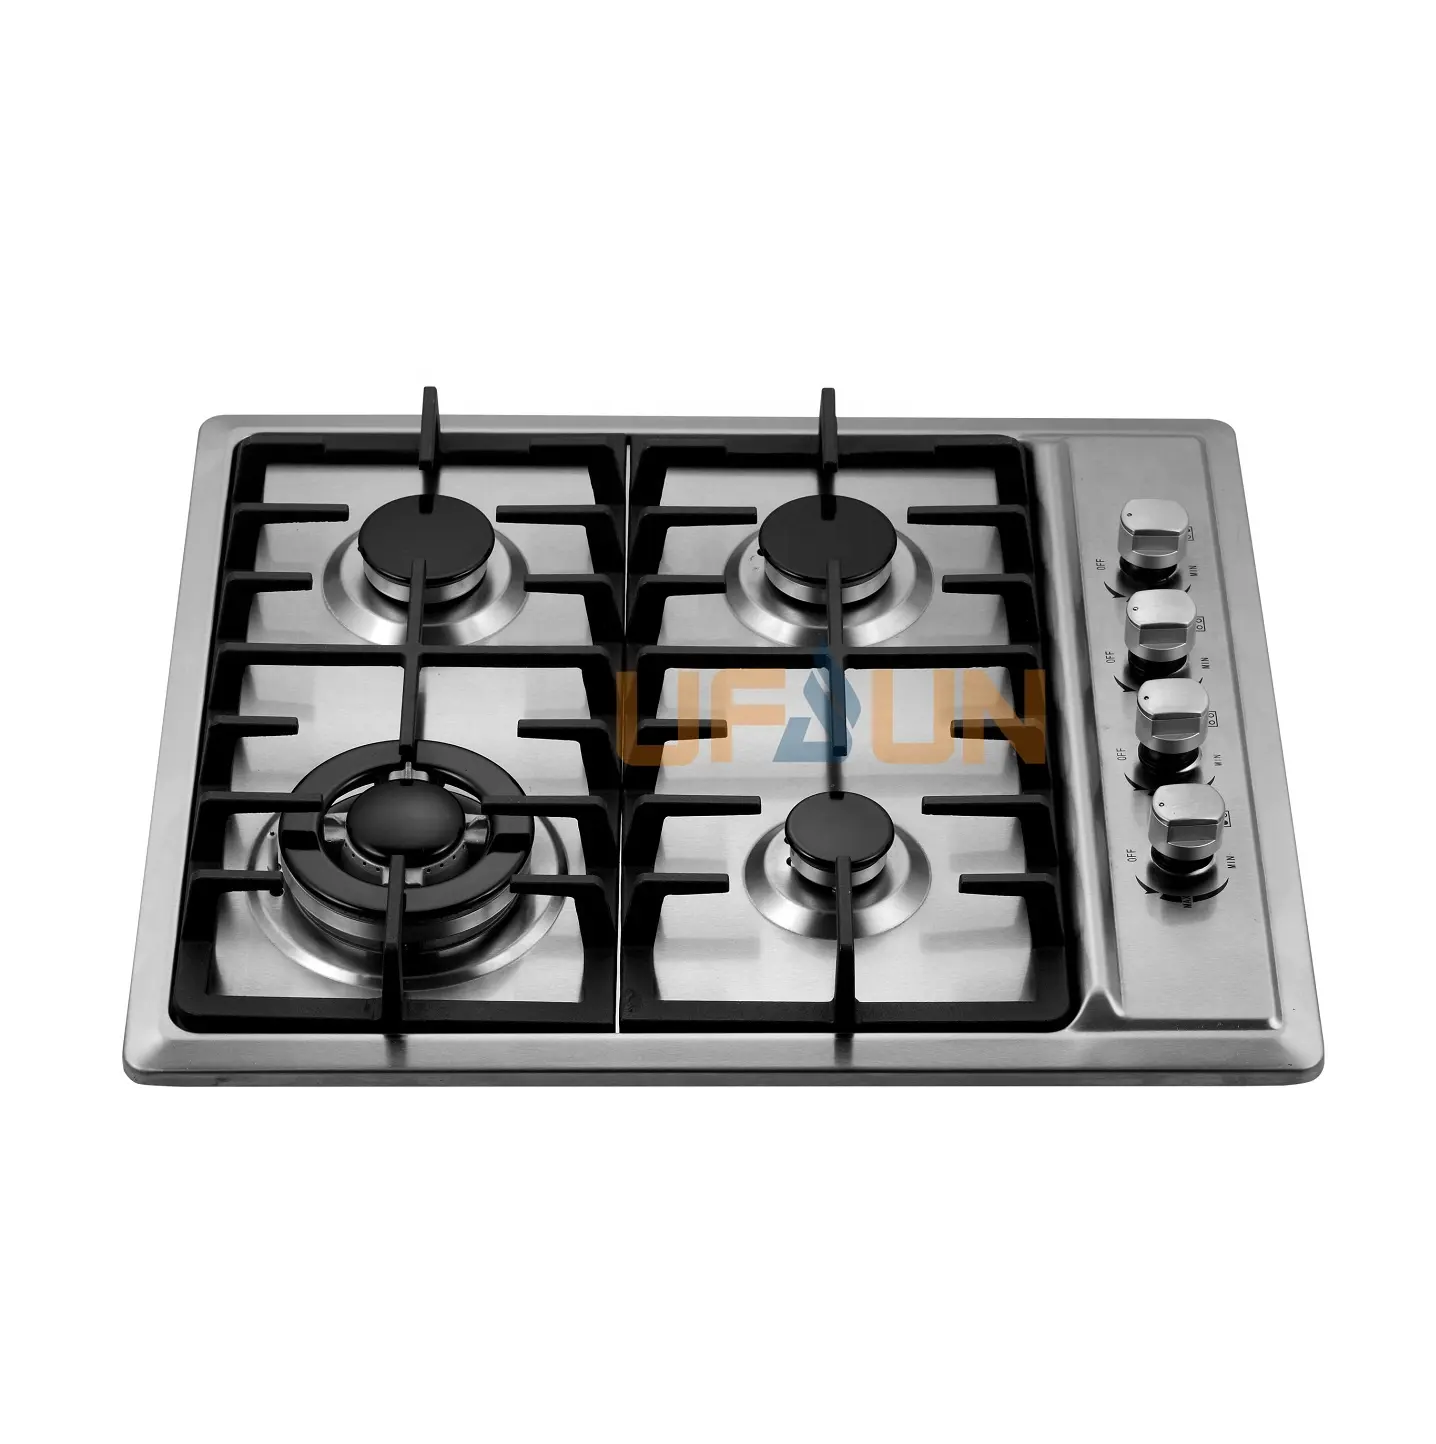 Hot selling model Built-in 60cm 4 burners Stainless Steel Top Plate gas stove hob Exact Flame function cooking gas cooktop